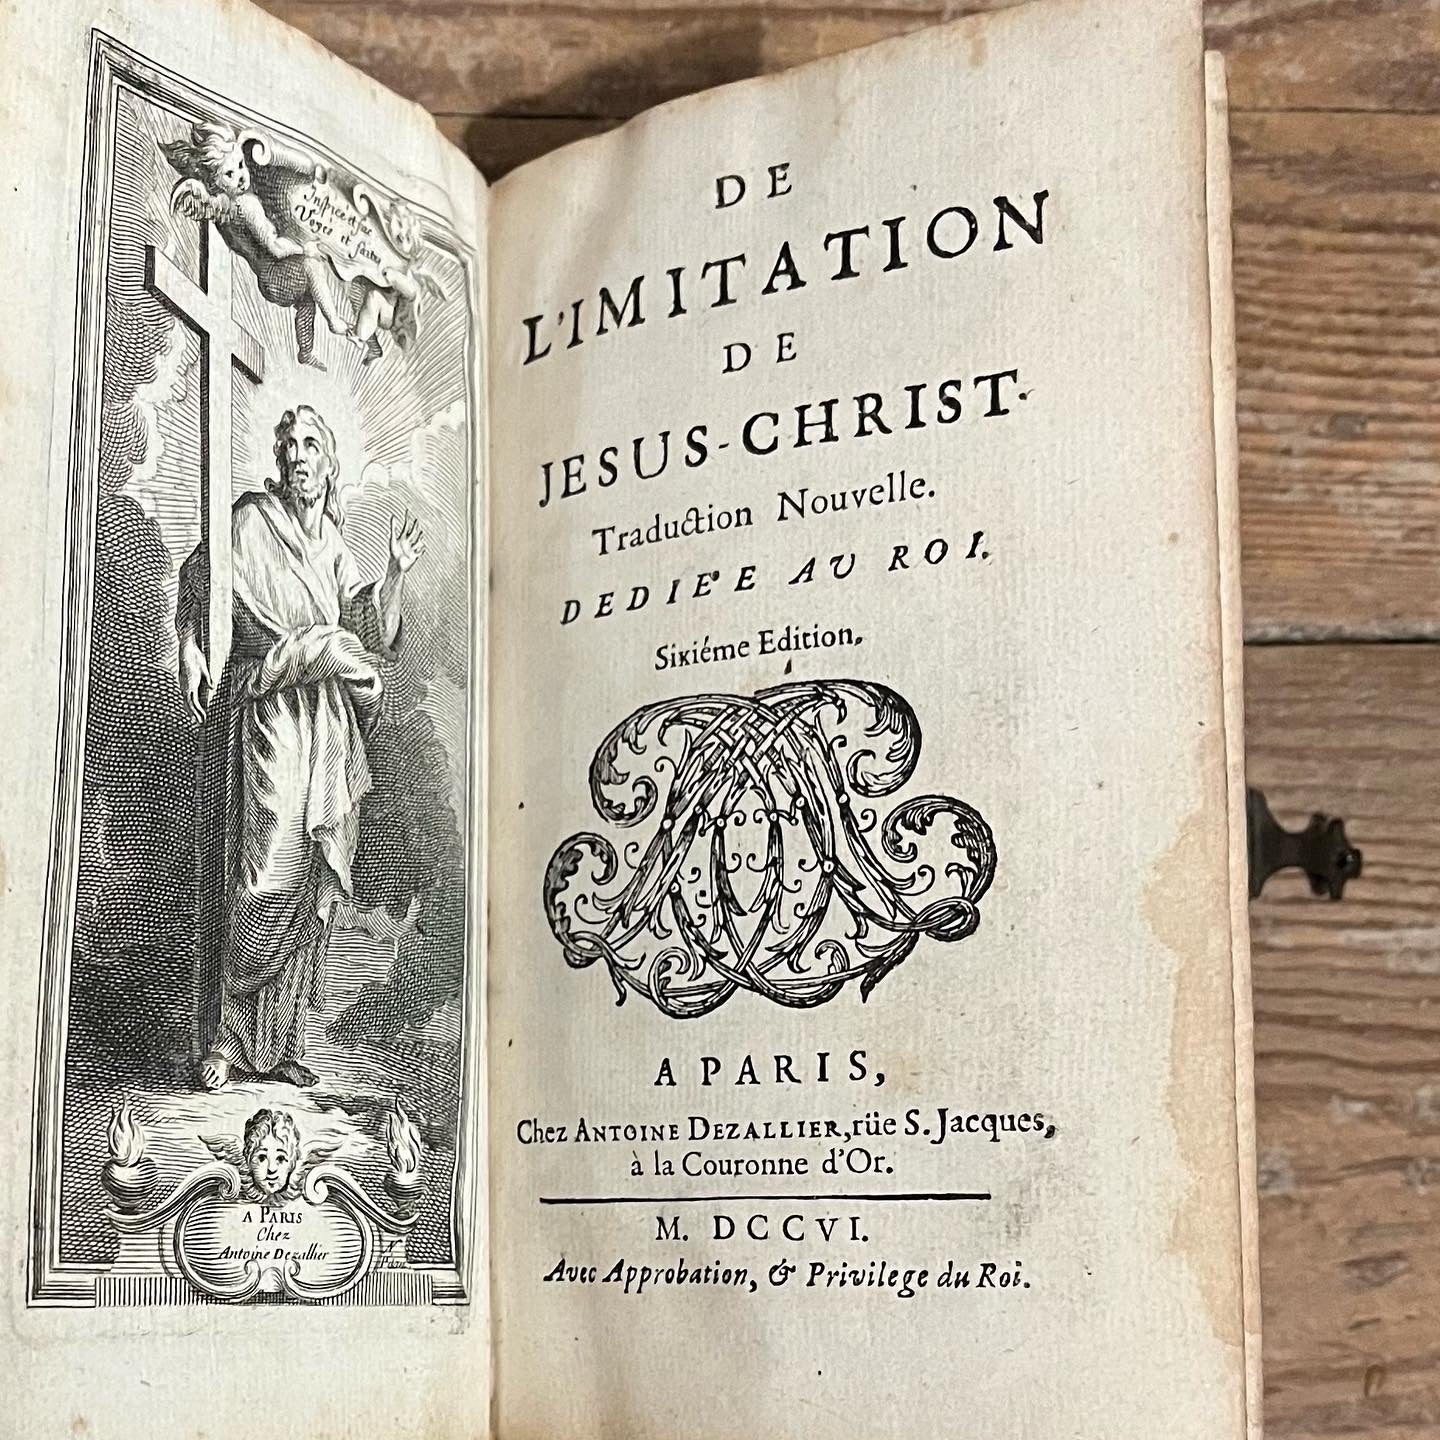 Lovely French Red Moroccan Binding - “L’Imitation de Jesus - Christ” - 1706